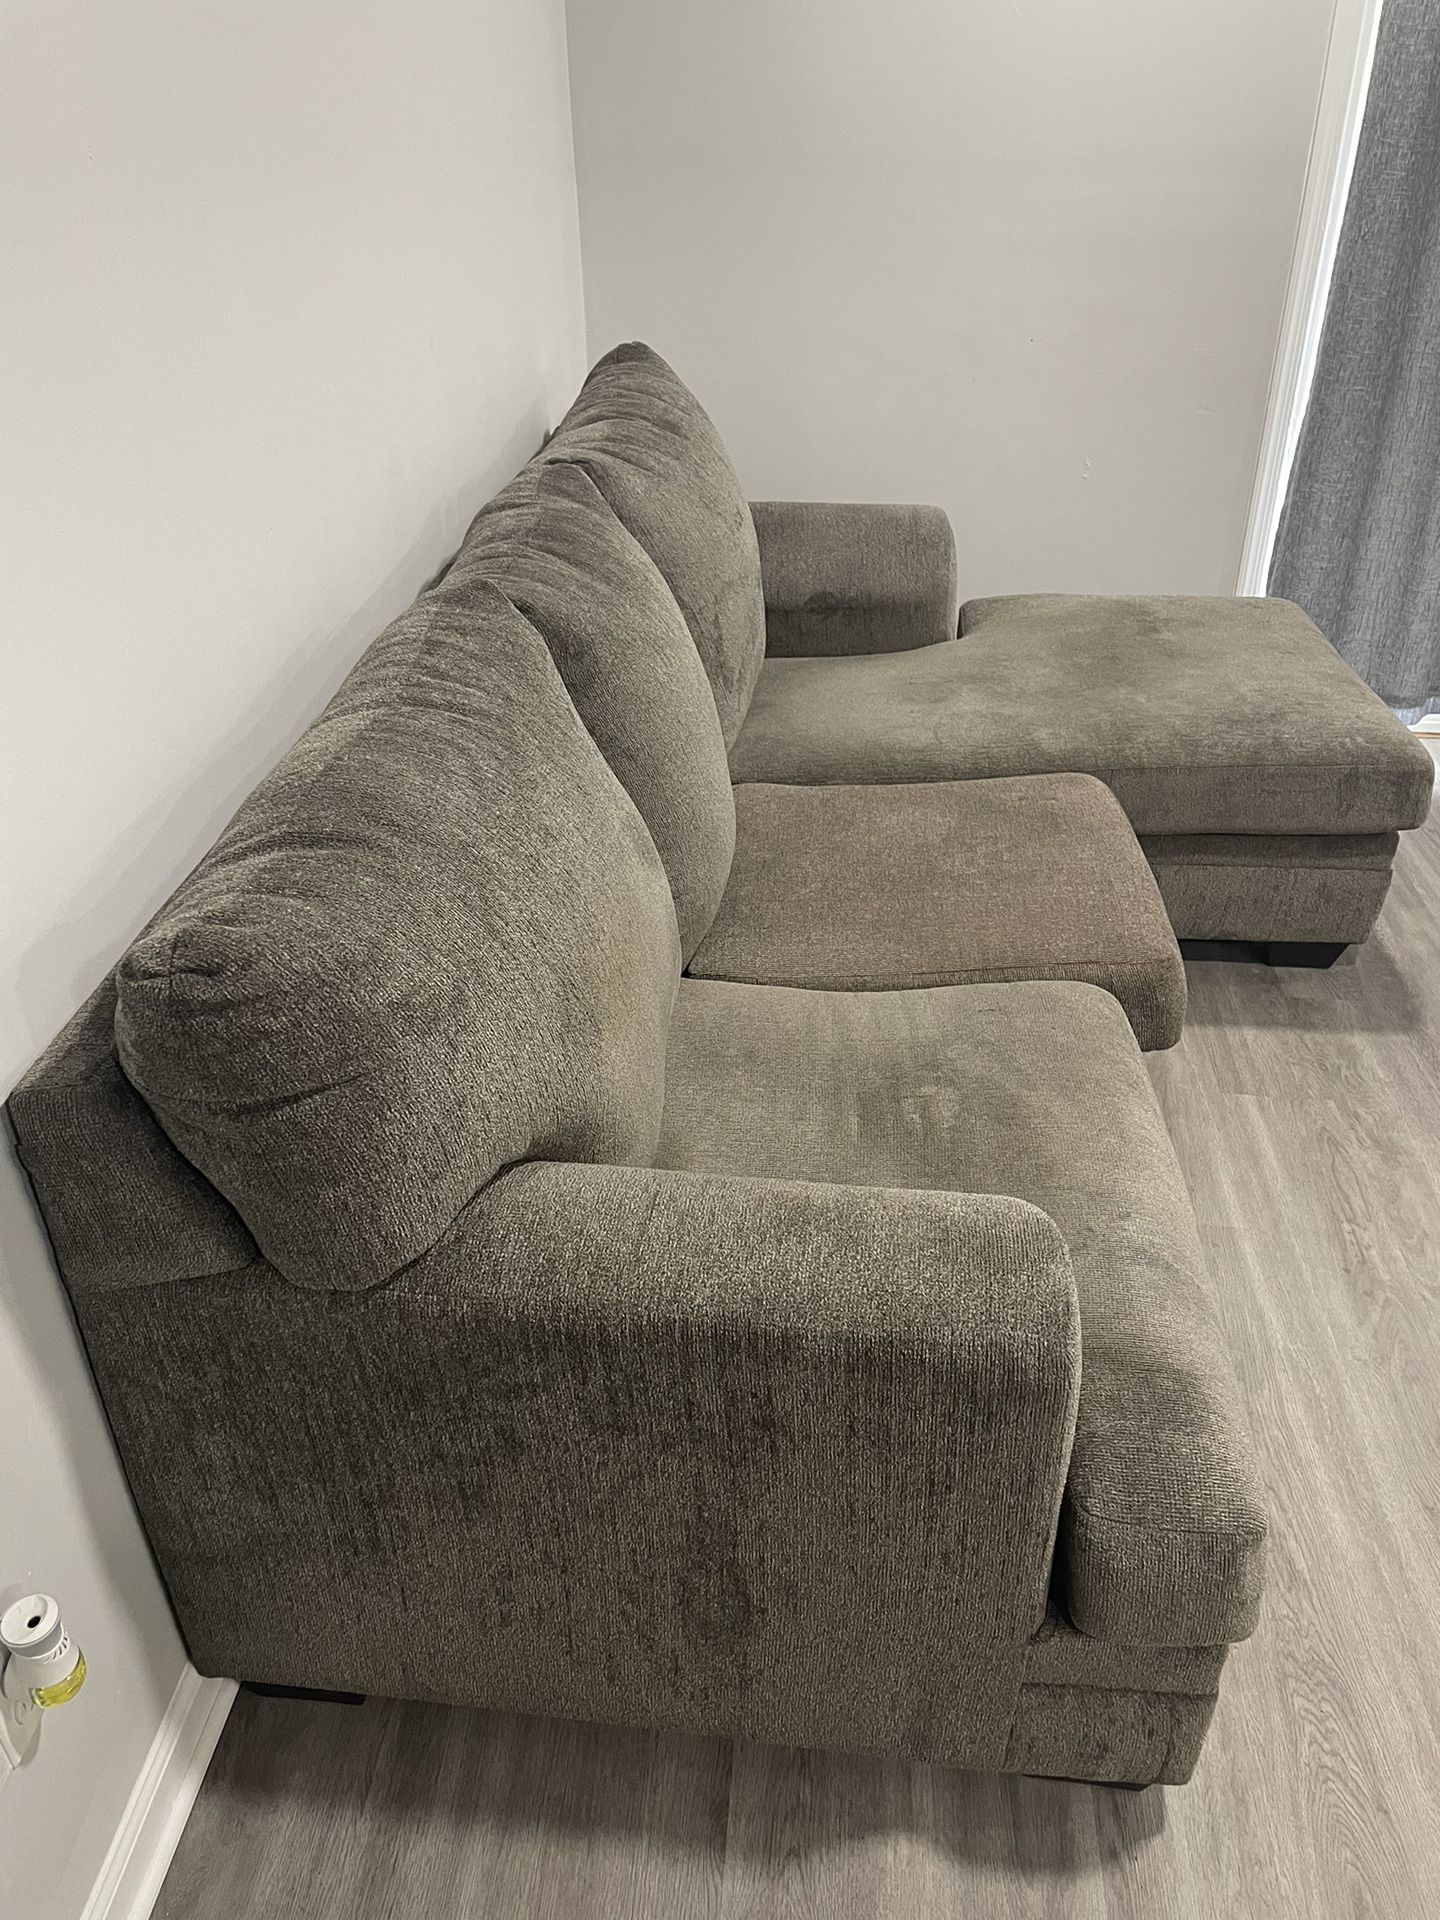 Grey Sofa With Chaise And Oversized Chair With Ottoman